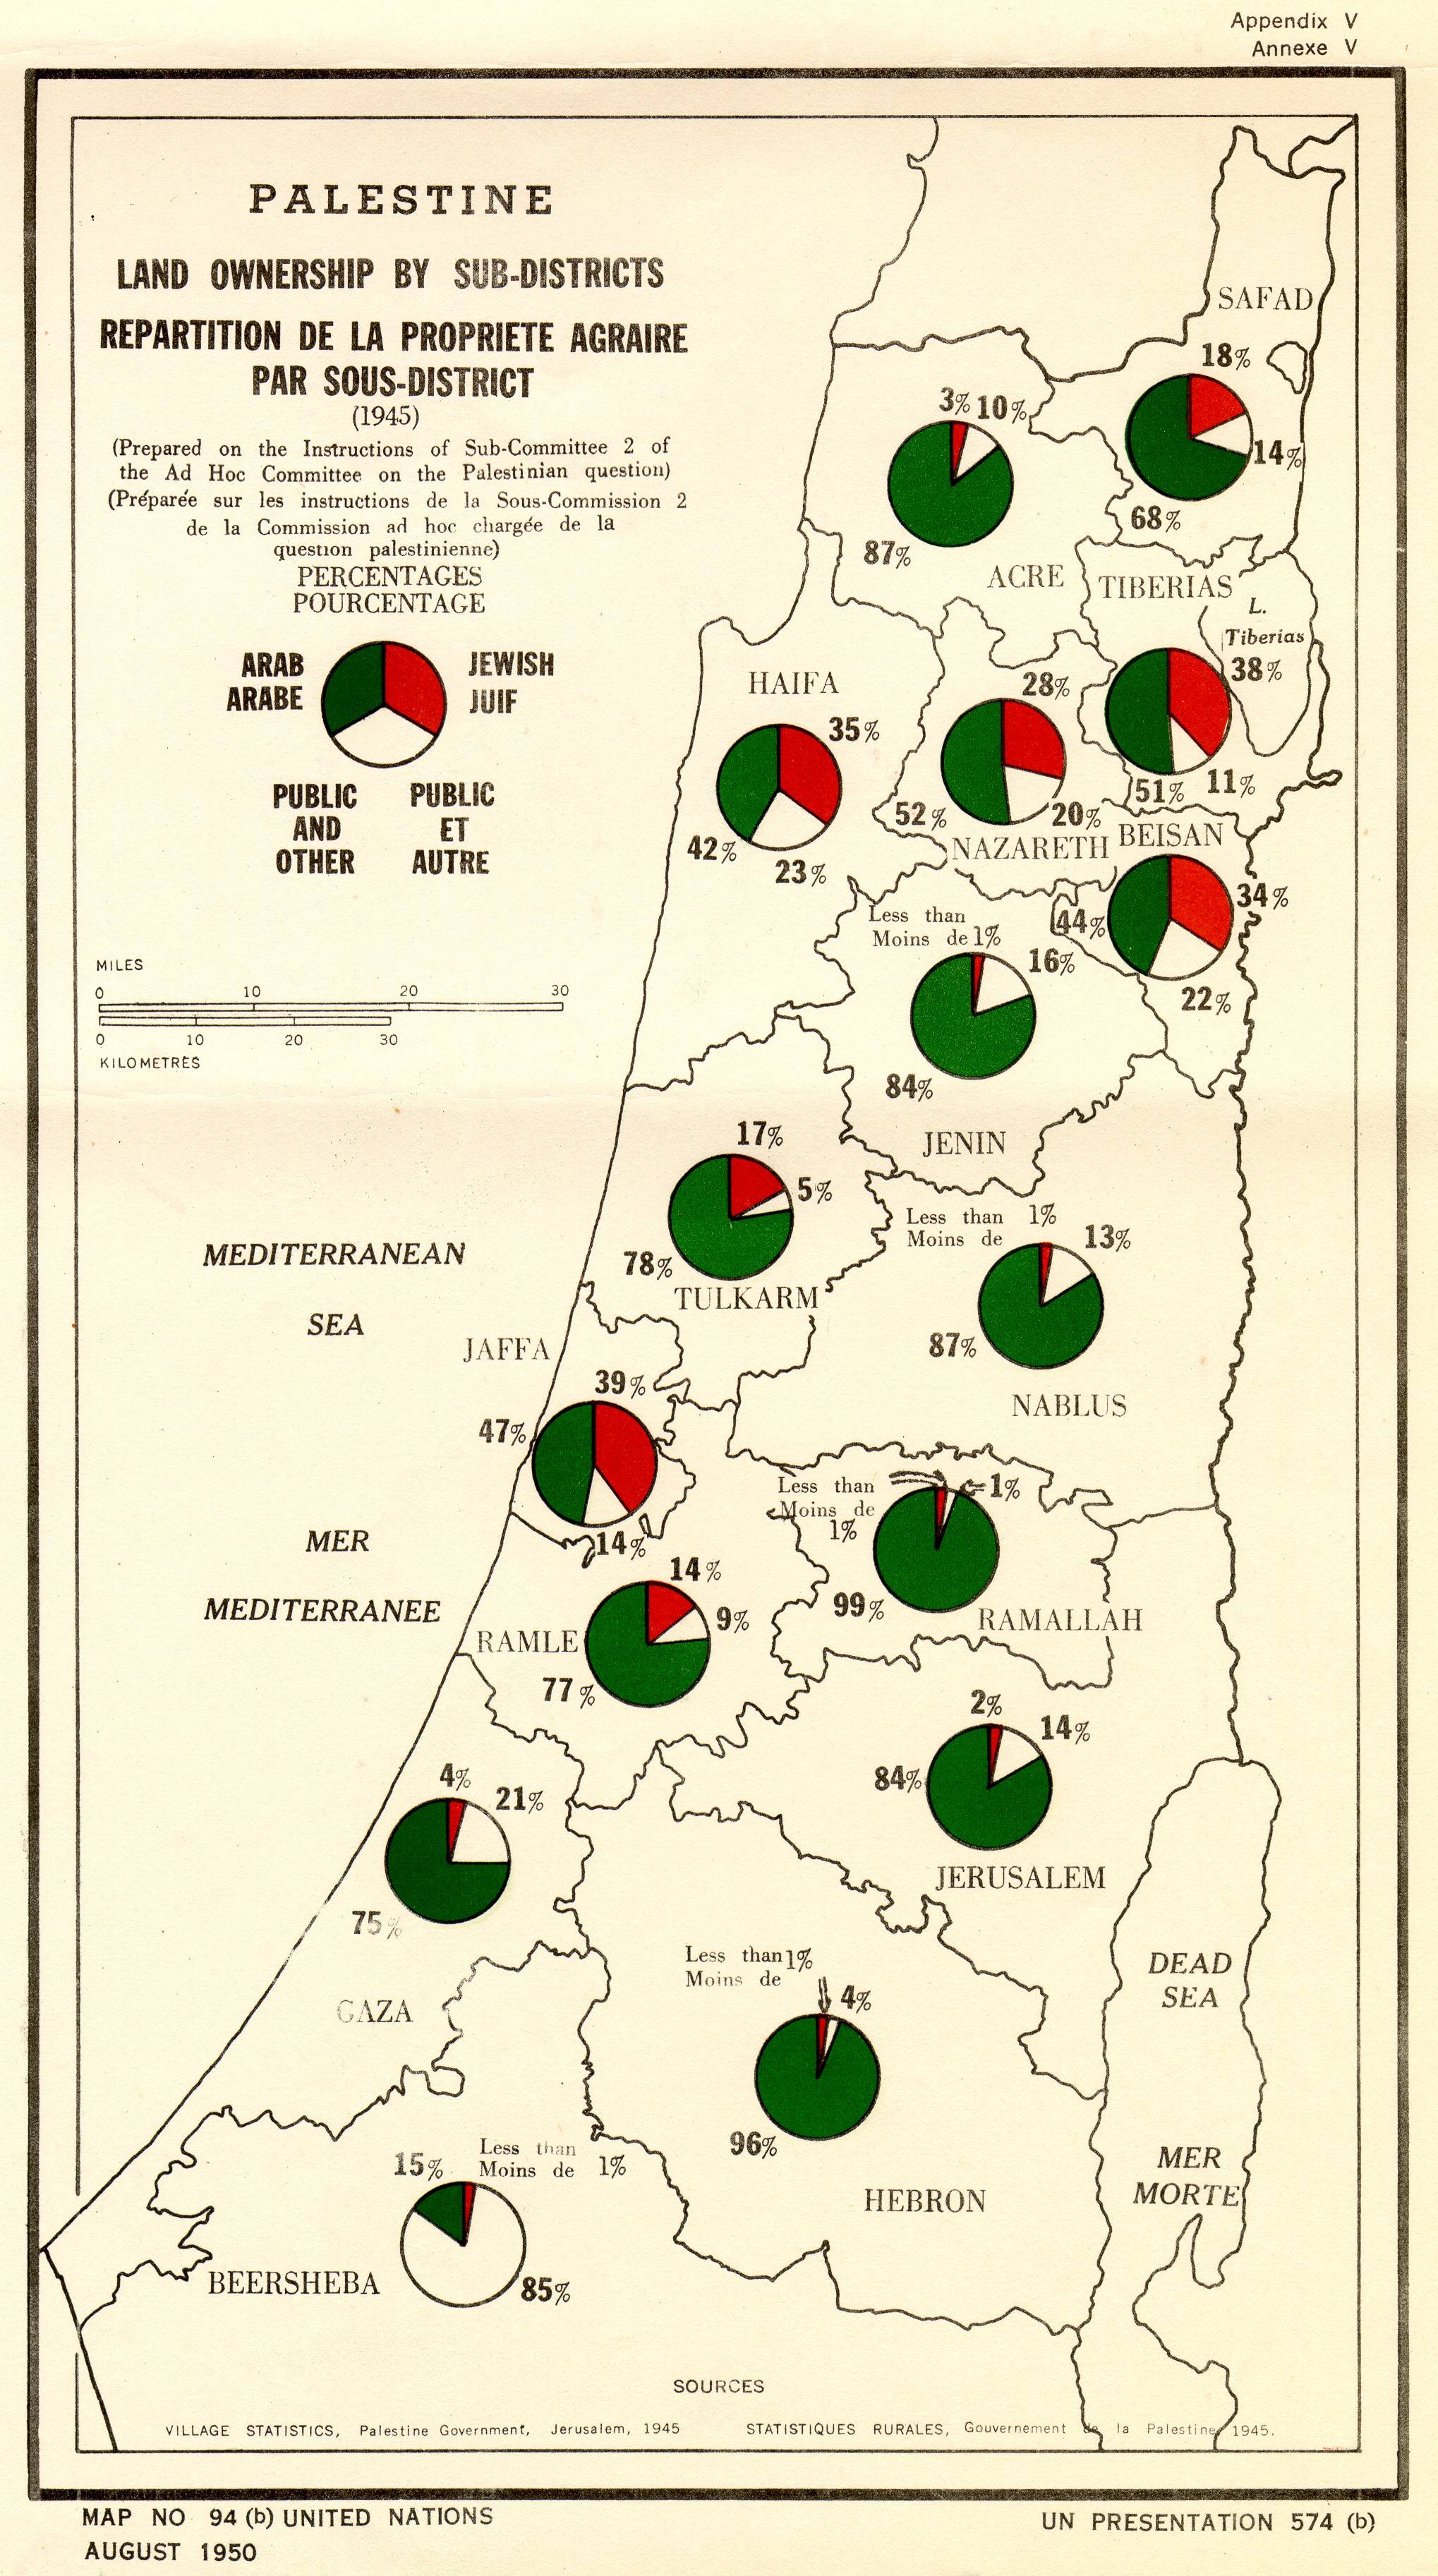 Appendix5_Land-ownership-by-sub-districts_full.jpg